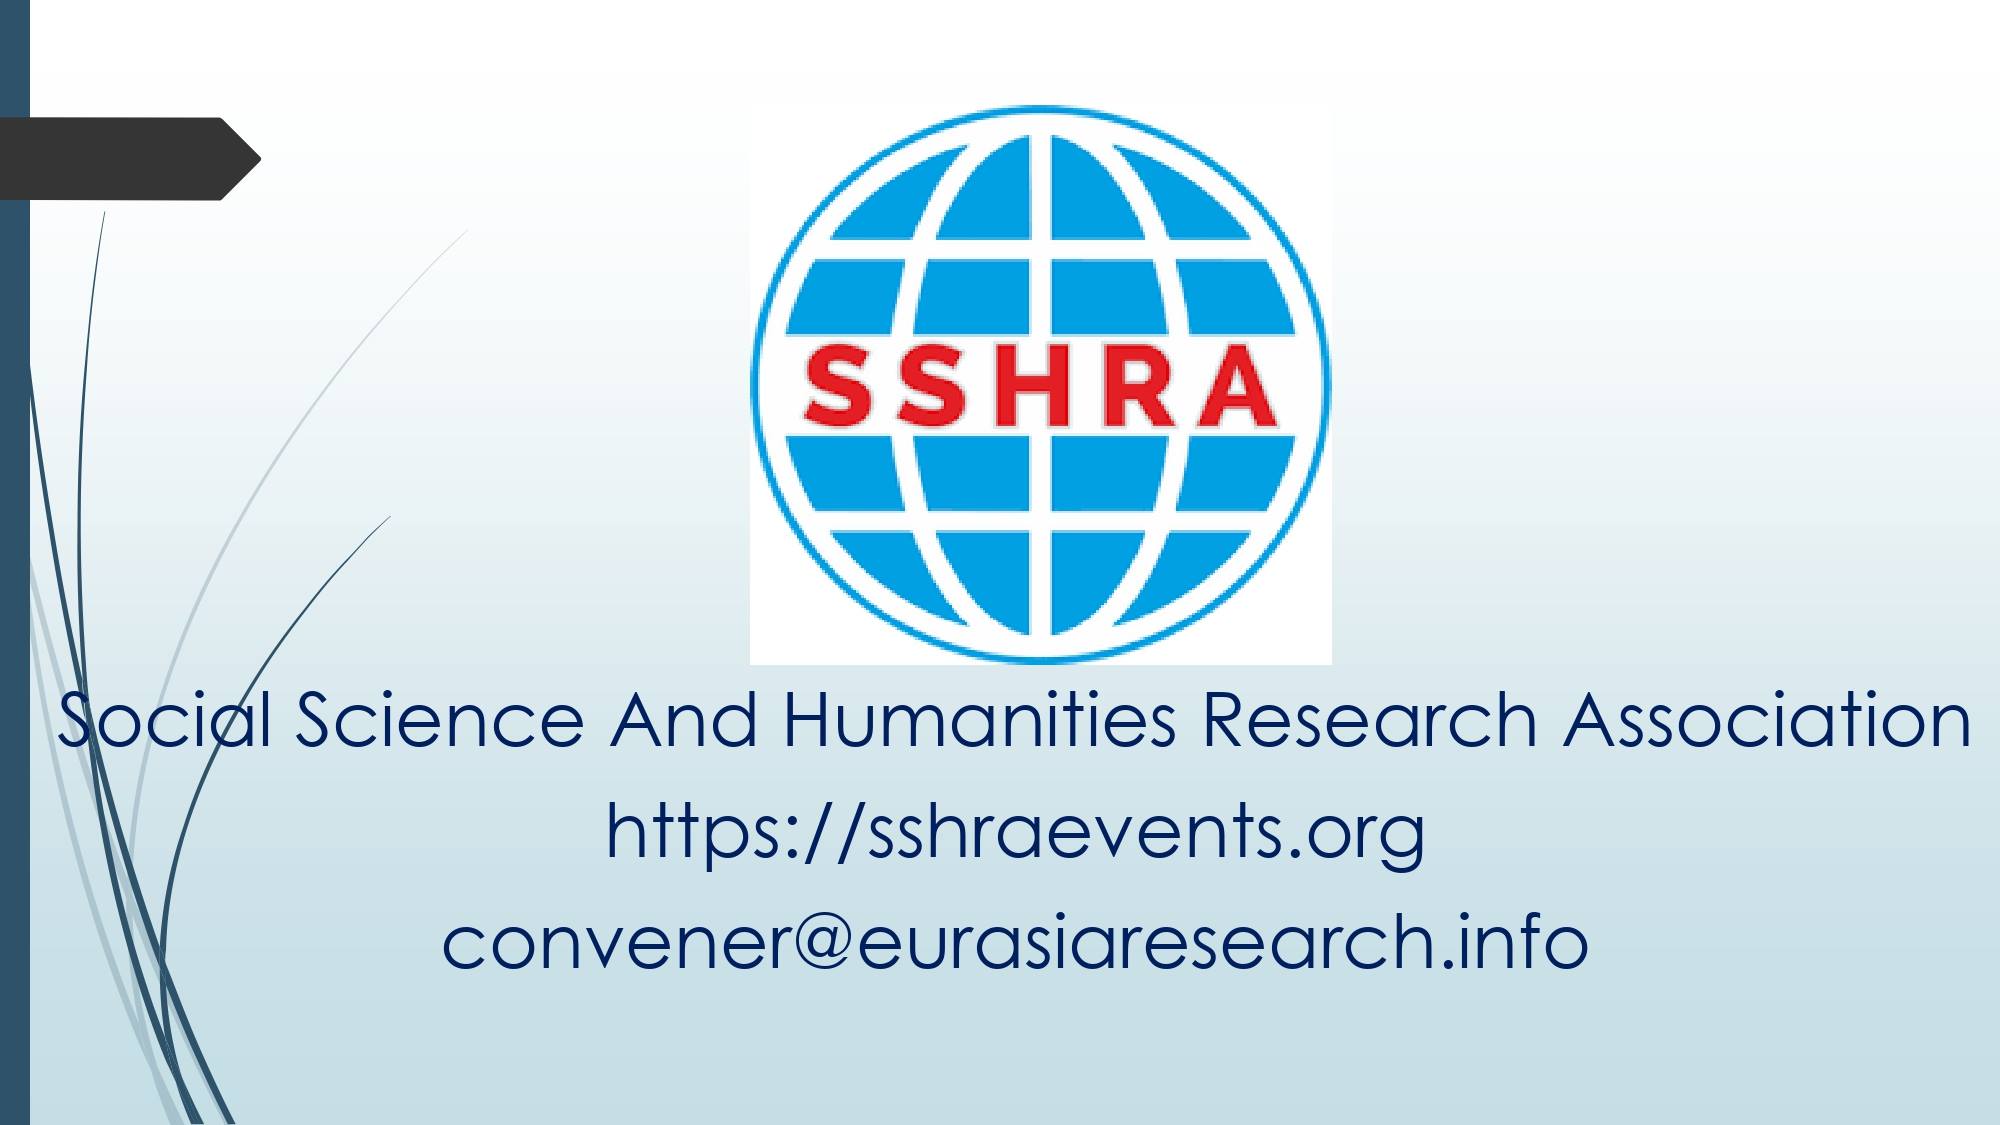 Paris – International Conference on Social Science & Humanities (ICSSH), 22-23 March 2022